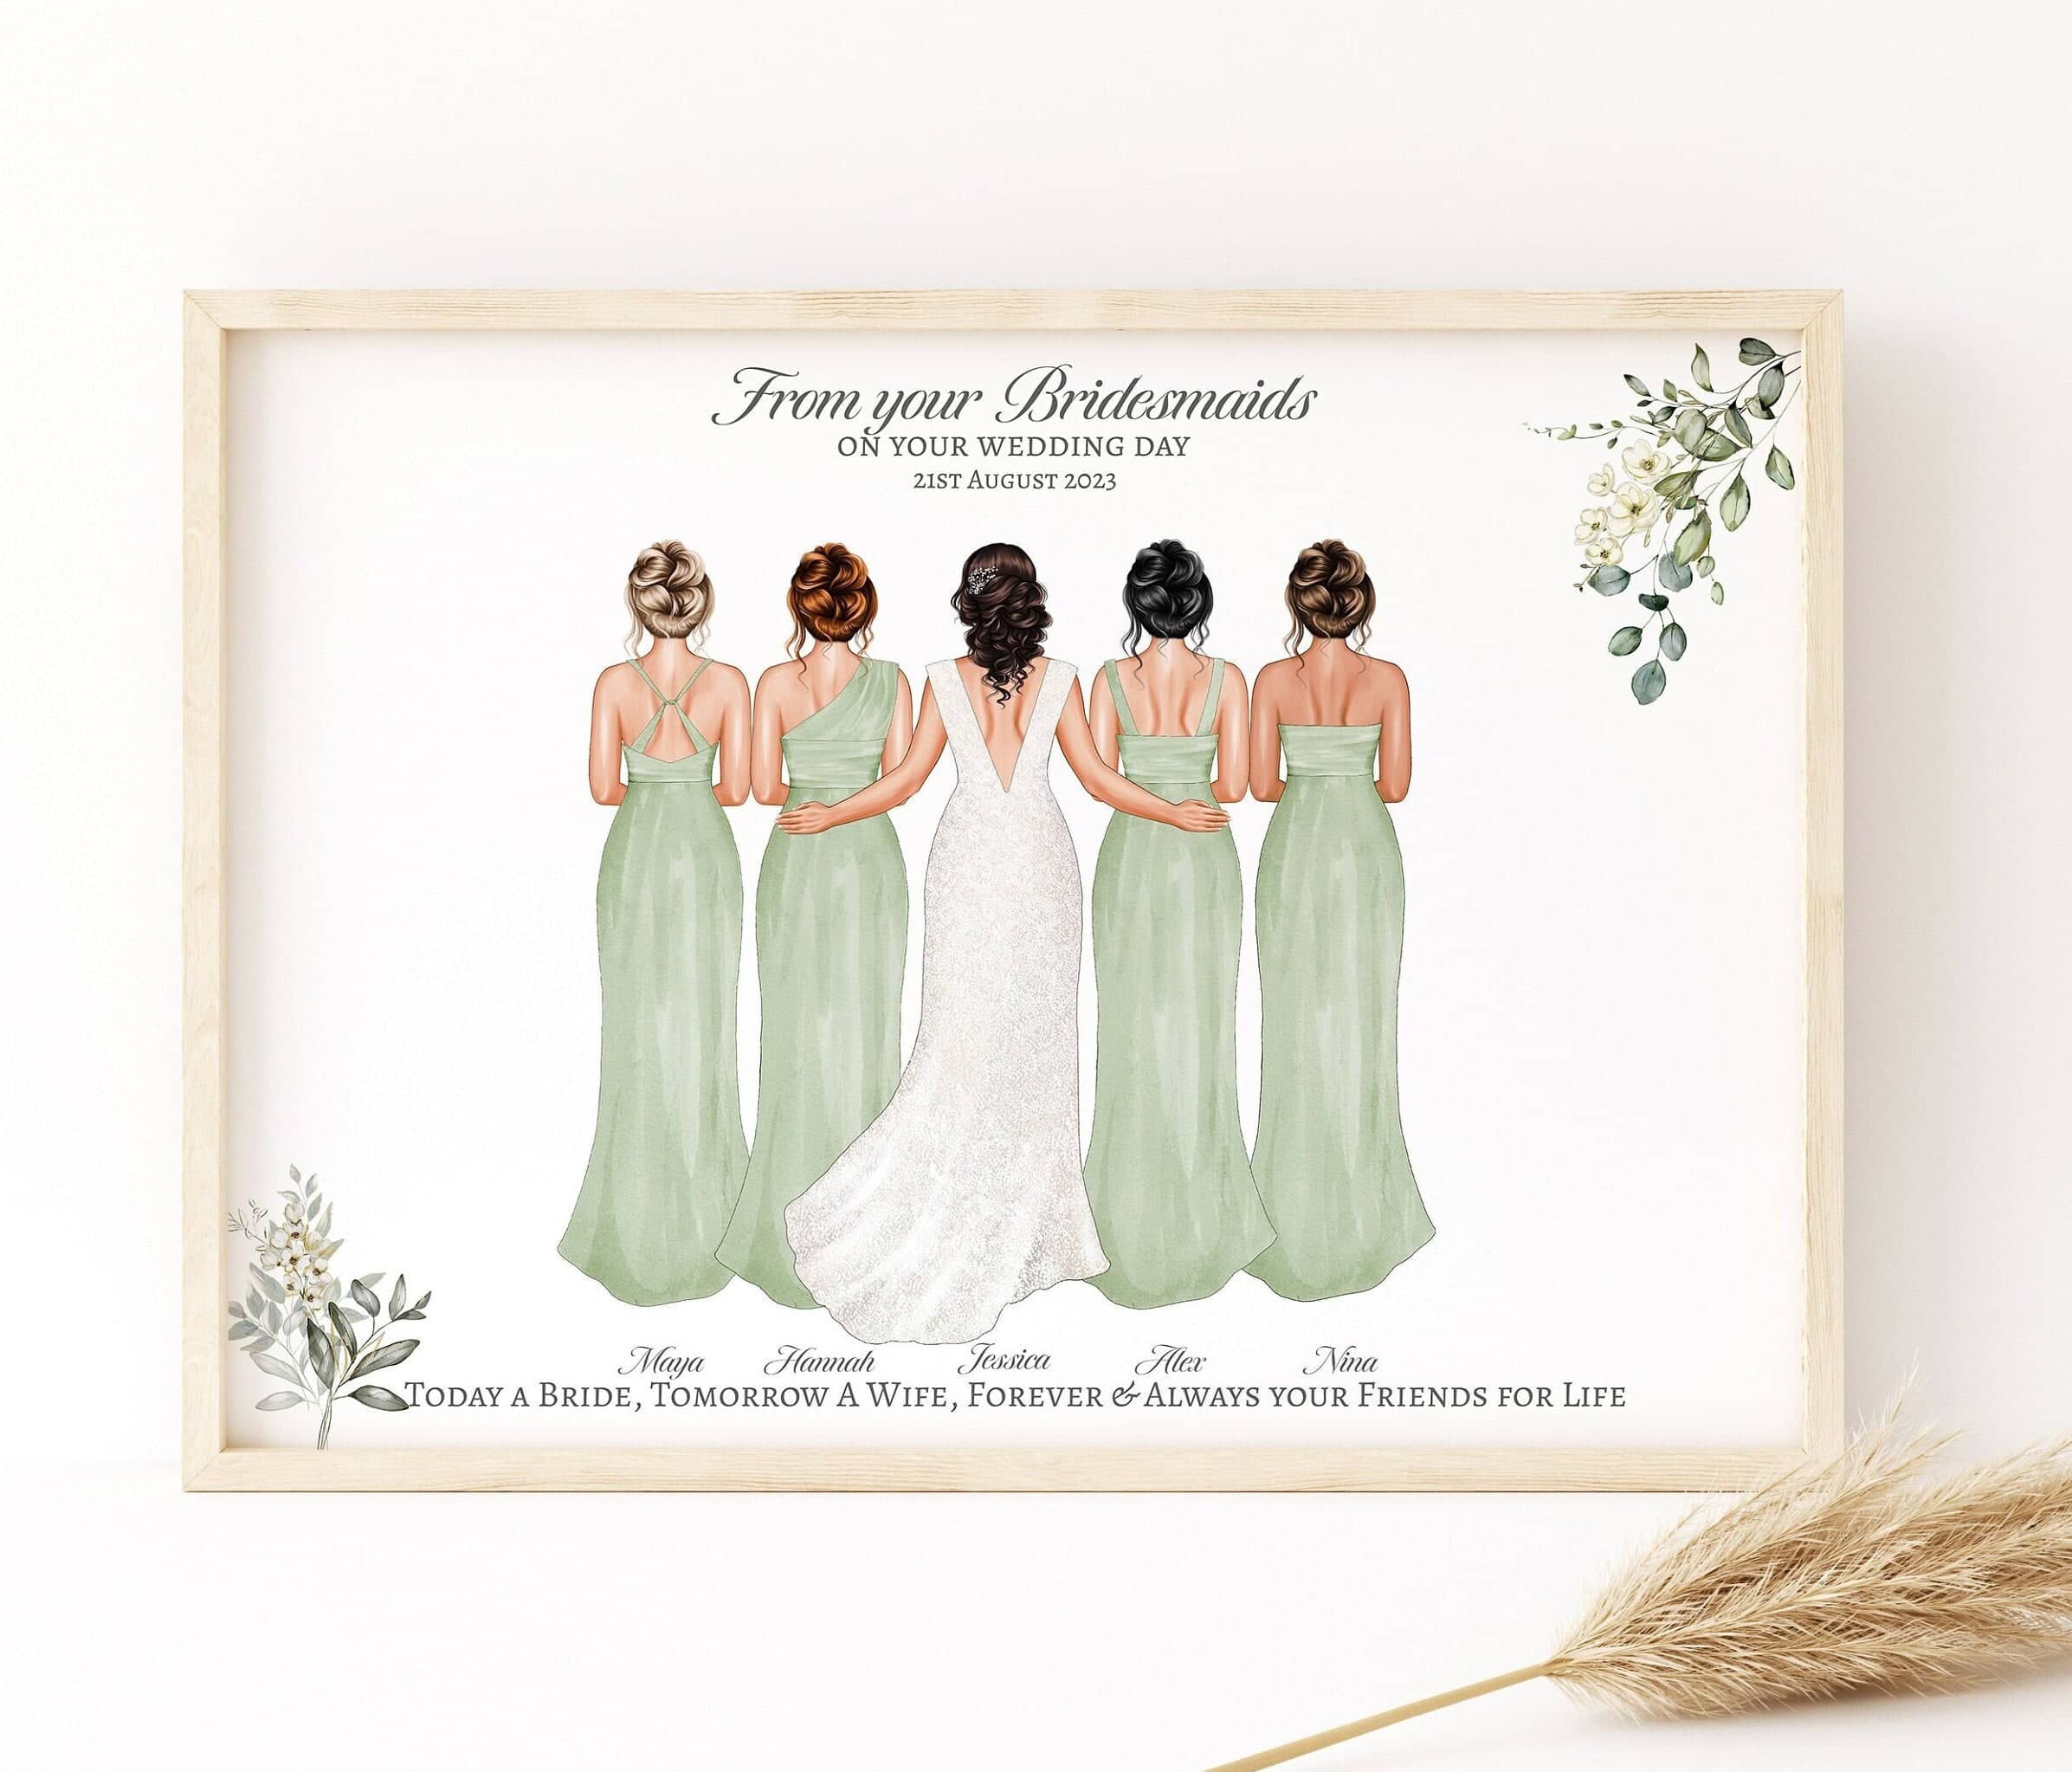 Personalised Wedding Gift, From your Bridesmaids Gift to Bride, Bride to Be Gift, Bridal Party Gift, Custom Bridal Party Print, Bride Gift